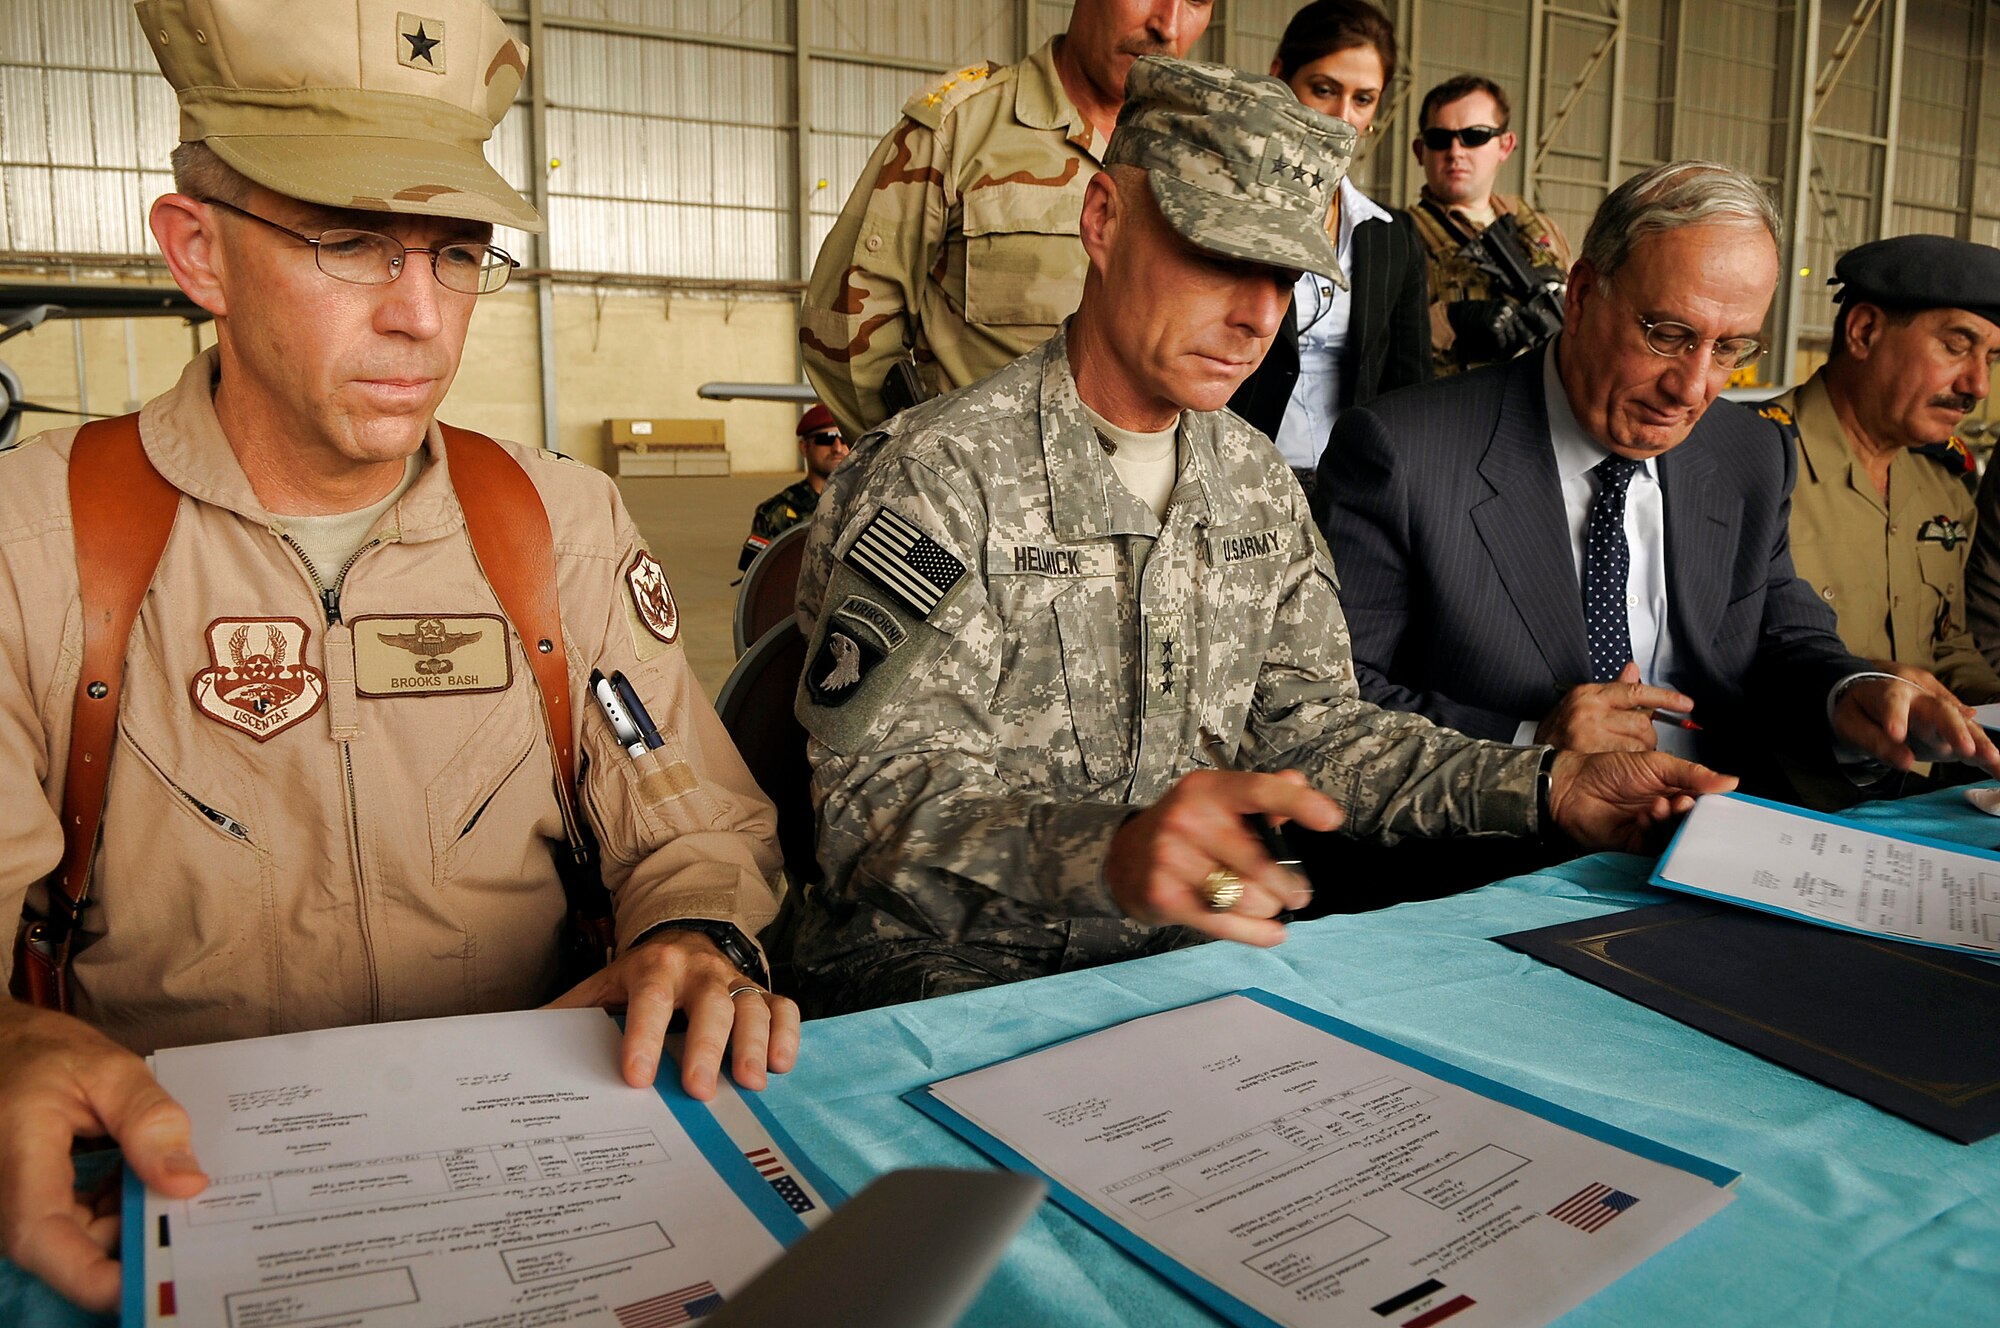 Brig. Gen. Brooks L. Bash, Coalition Air Force Training Team commander,  Army Lt. Gen. Frank Helmick, commander of Multi-National Security Transition Command-Iraq, Iraqi Defense Minister Abdul-Qader Mohammed Jassim, and Iraqi Air Force Chief Kamal Abdul-Sattar al-Barazanchi sign paperwork to transfer ownership of 11 U.S. Forces aircraft to the Iraqi air force at New Al Muthana Air Base, Iraq, July 9. General Helmick signed over eight Cessna 172s and three Cessna Caravan 208s worth more than $9 million to the Iraqi Defense Minister. (U.S. Air Force photo/Tech. Sgt. Jeffrey Allen)